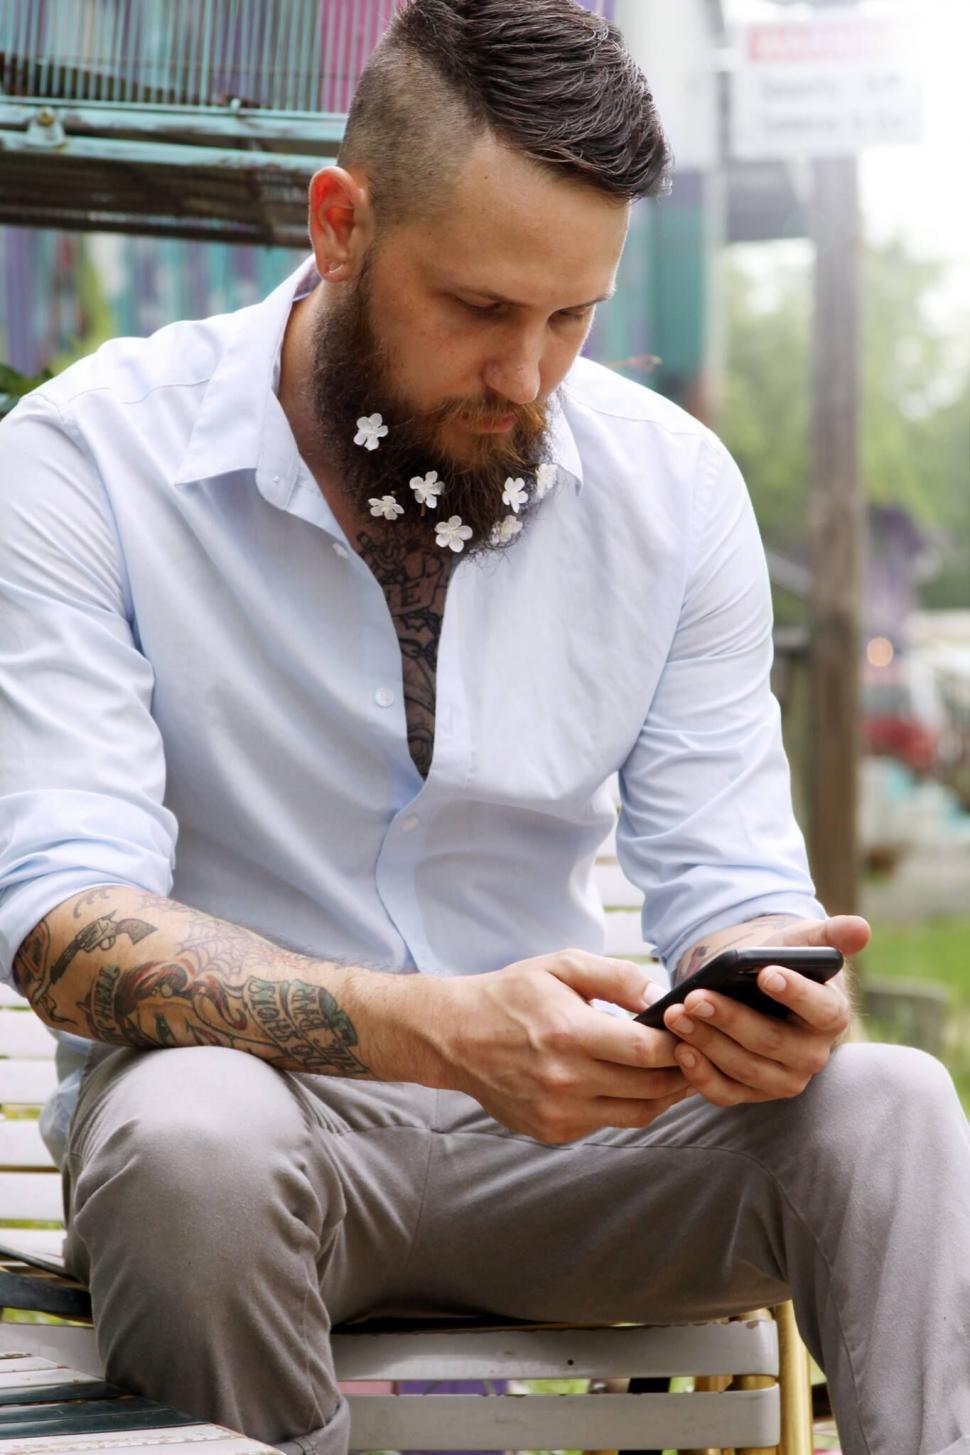 Free Image of Man with Tattoos Using Smartphone 